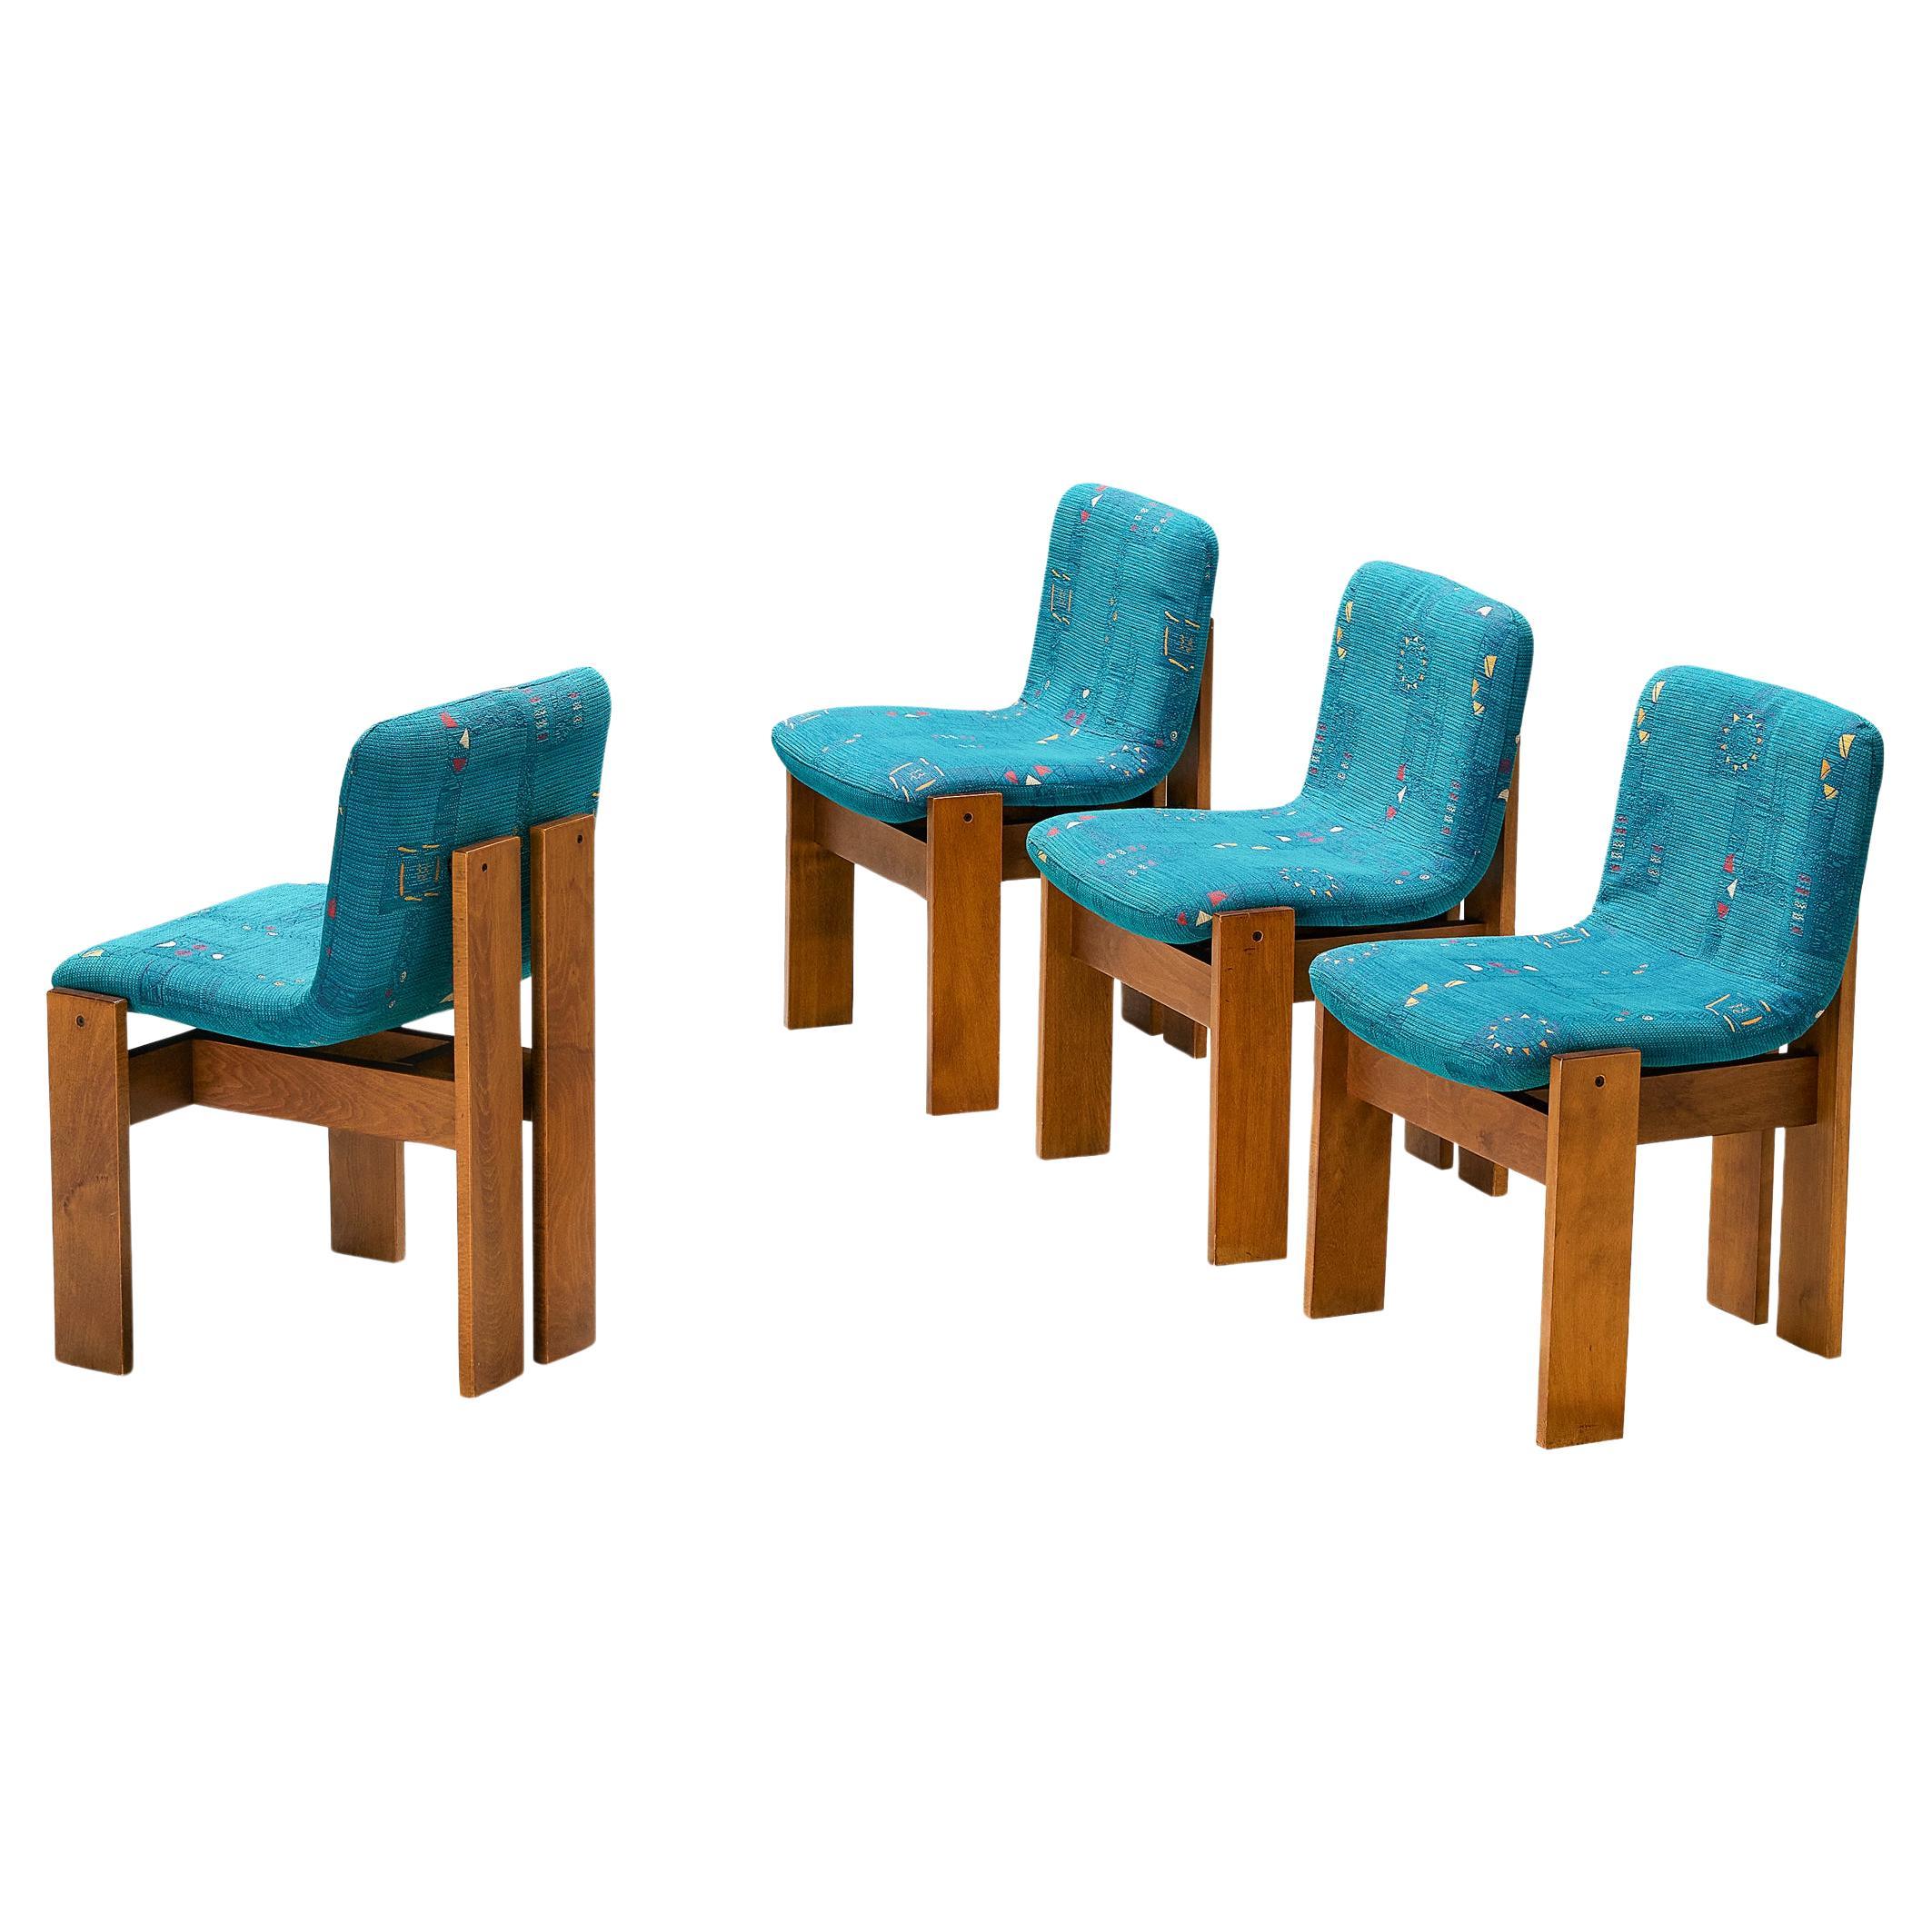 Set of Four Italian Dining Chairs in Wood and Turquoise Upholstery 